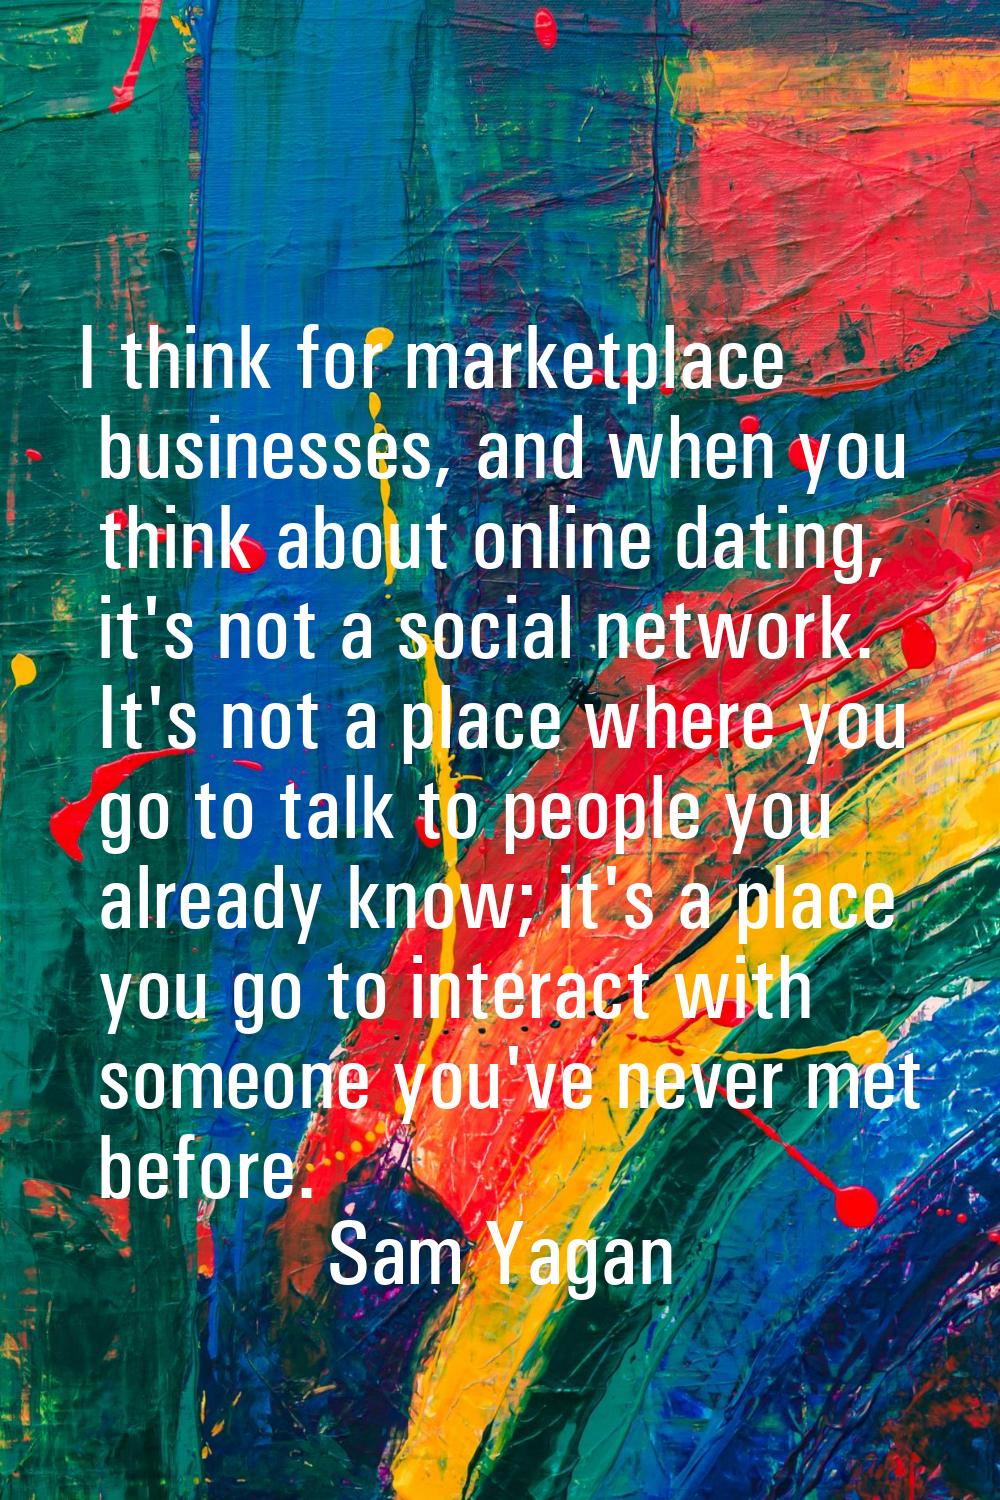 I think for marketplace businesses, and when you think about online dating, it's not a social netwo